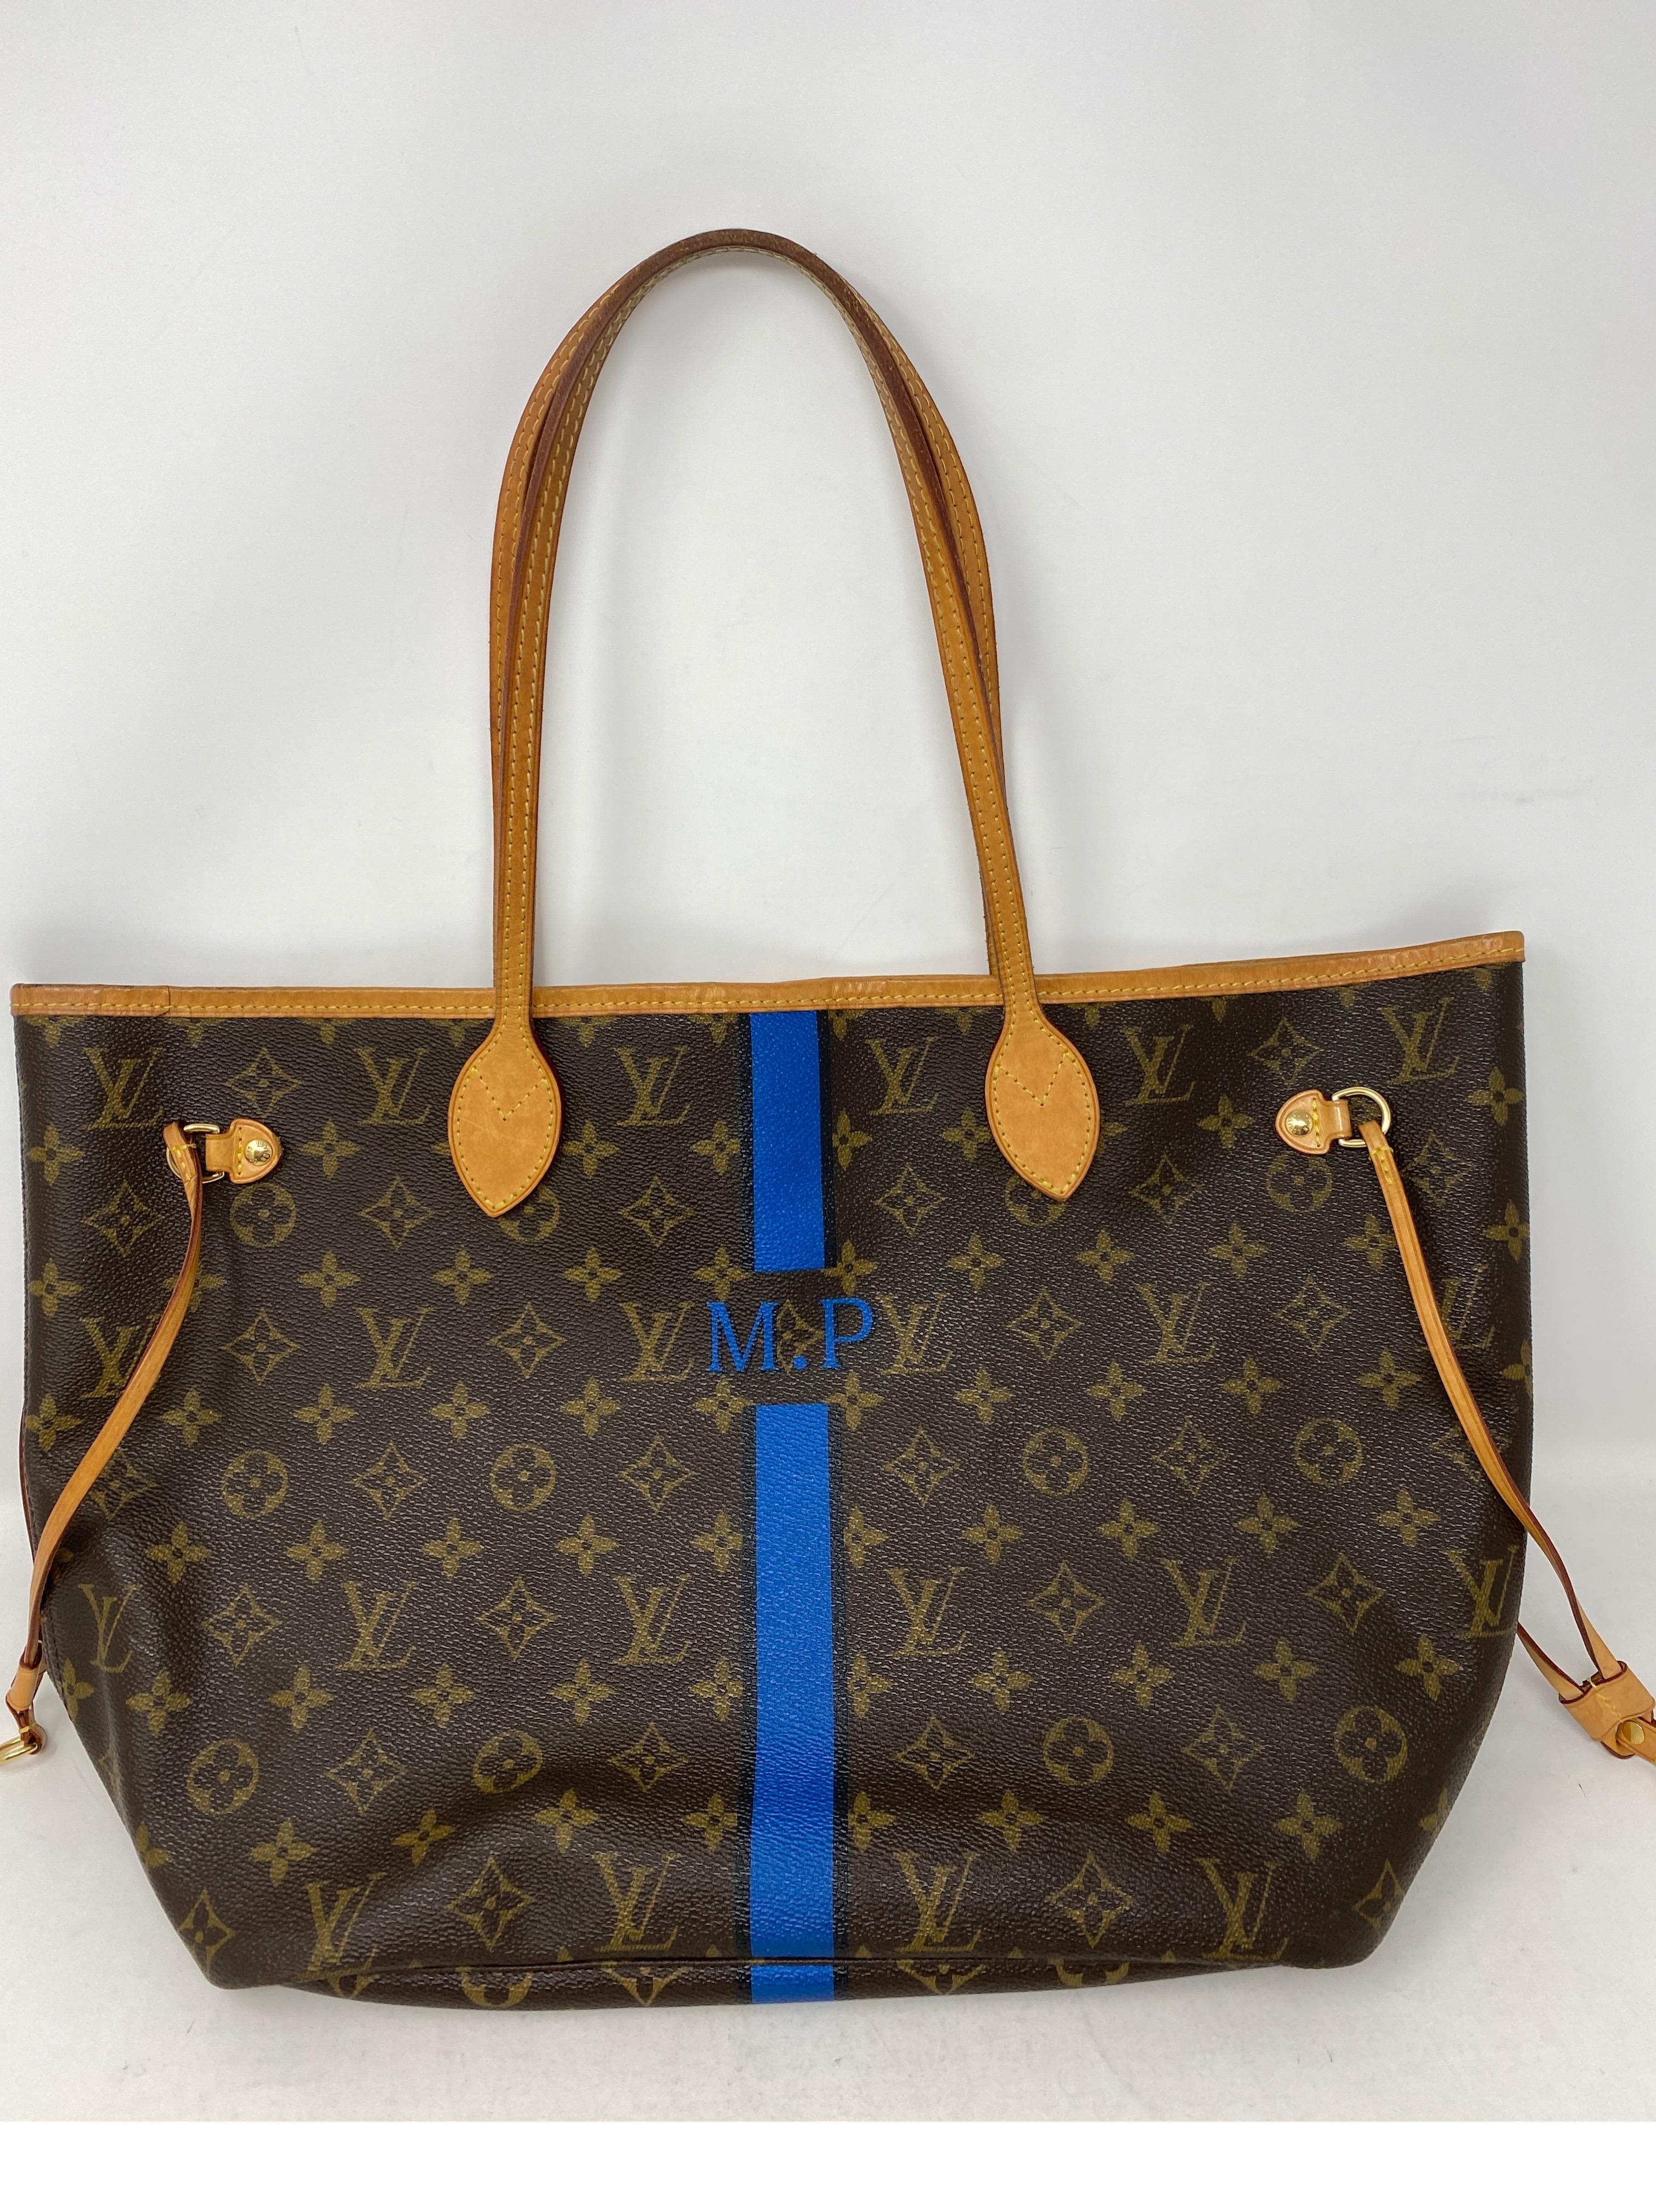 Louis Vuitton Neverfull Initial MP MM Bag. Neverfull with M.P. initials. Blue trim details. Interior blue canvas. Good condition. Guaranteed authentic. 